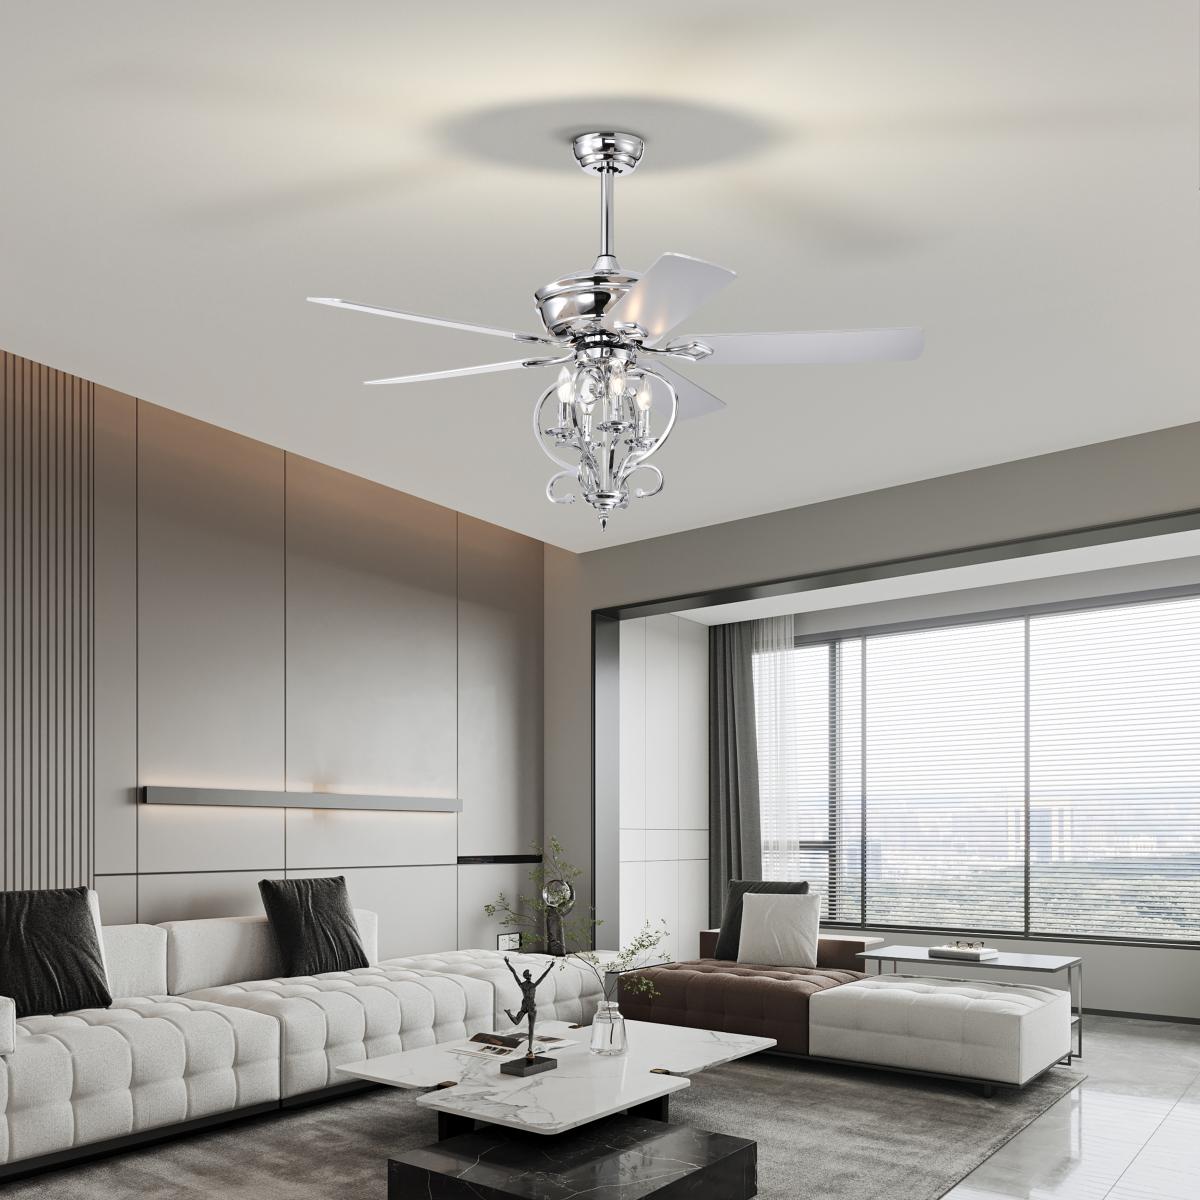 52 inch 4 Lights Ceiling Fan with 5 Wood Blades, Two-color fan blade, Ac Motor, Remote Control, Reversible Airflow, 3-Speed, Adjustable Height, Traditional Ceiling Fan for home decorate (Silver)